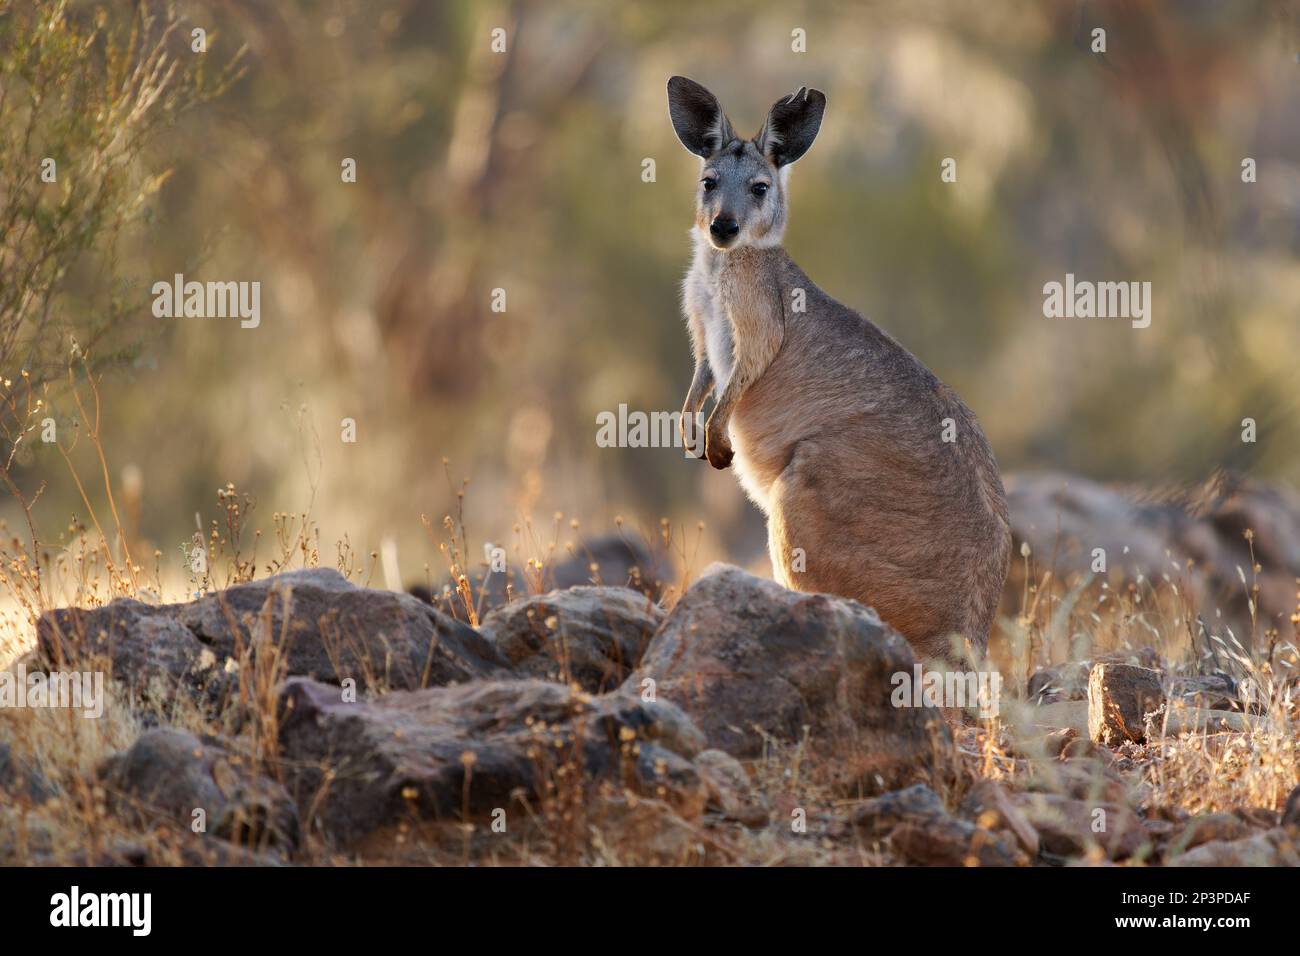 Common Wallaroo - Osphranter robustus also called euro or hill wallaroo, mostly nocturnal and solitary, loud hissing noise, sexually dimorphic, like m Stock Photo